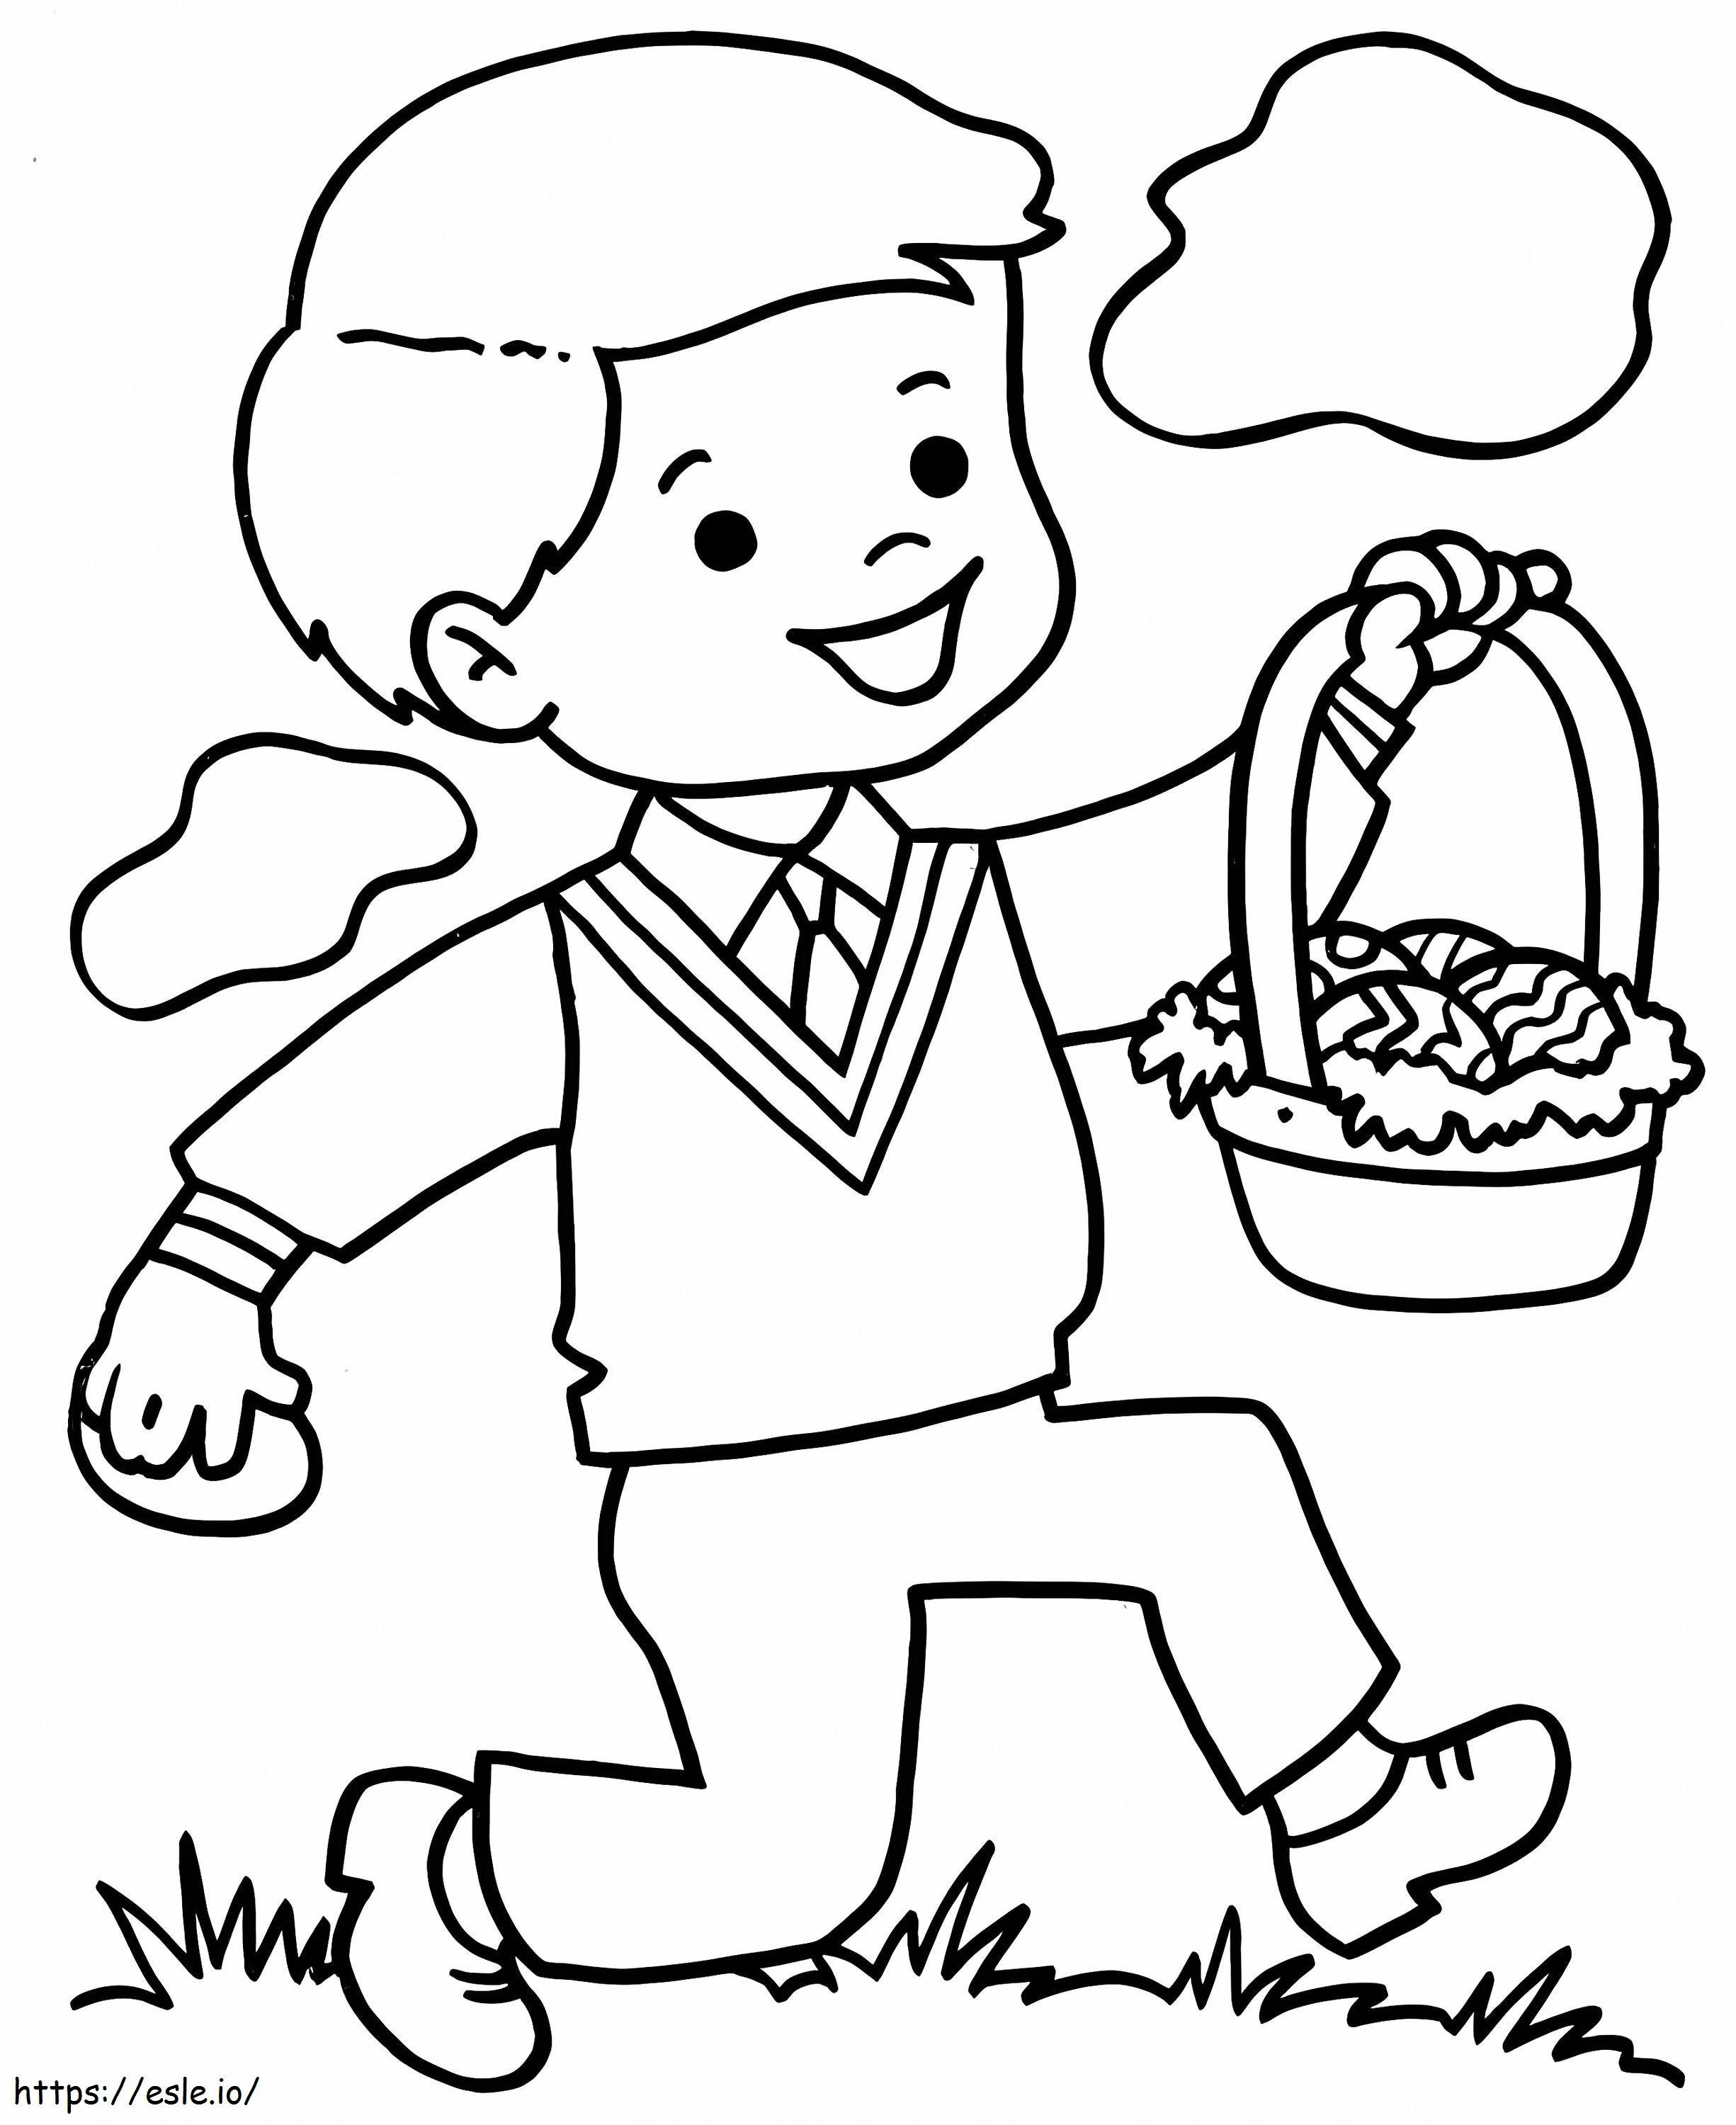 Boy Holding Easter Basket coloring page